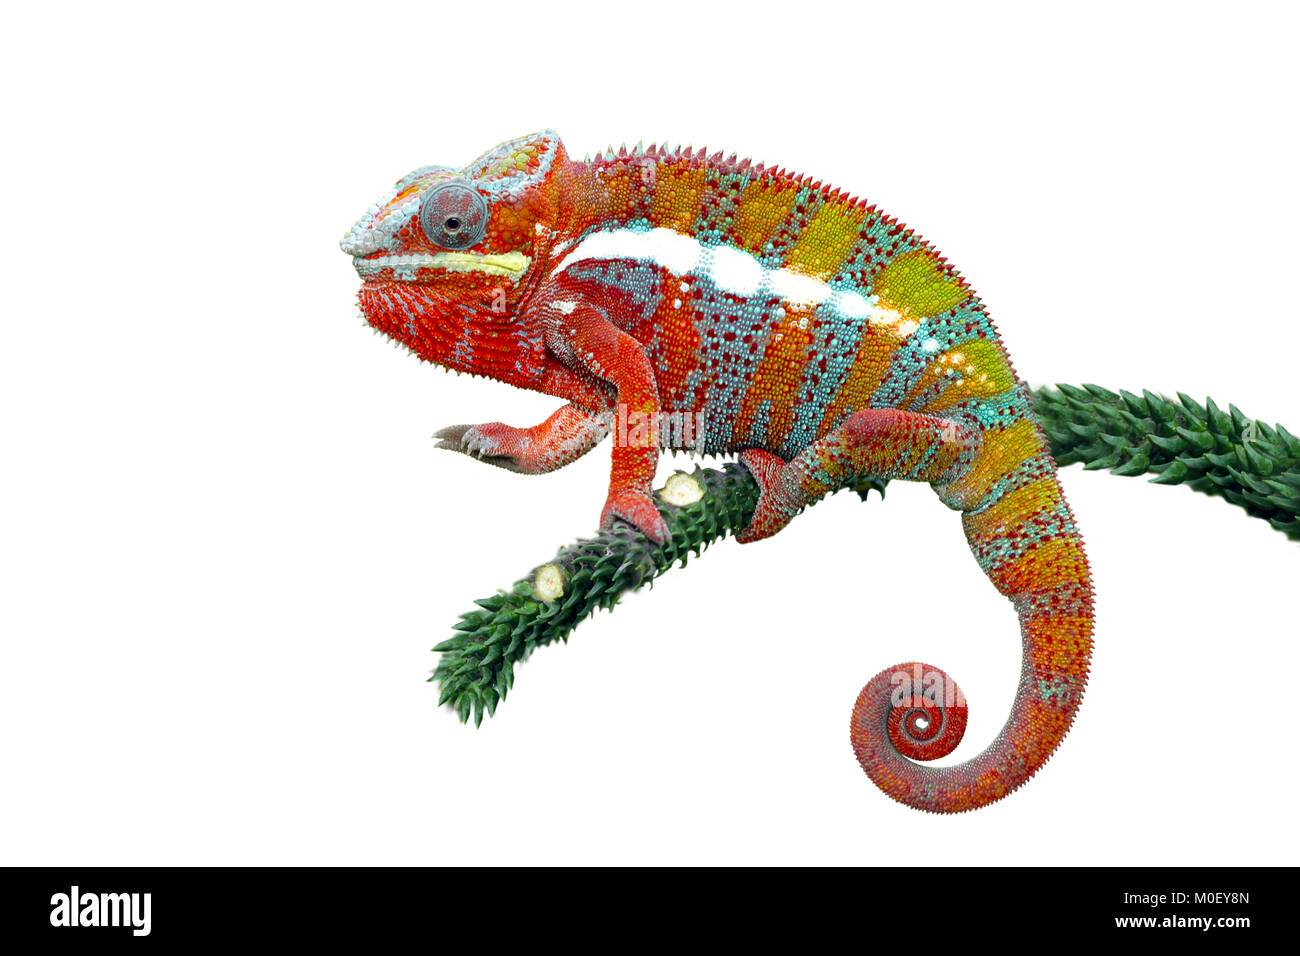 Panther Chameleon on a branch Stock Photo